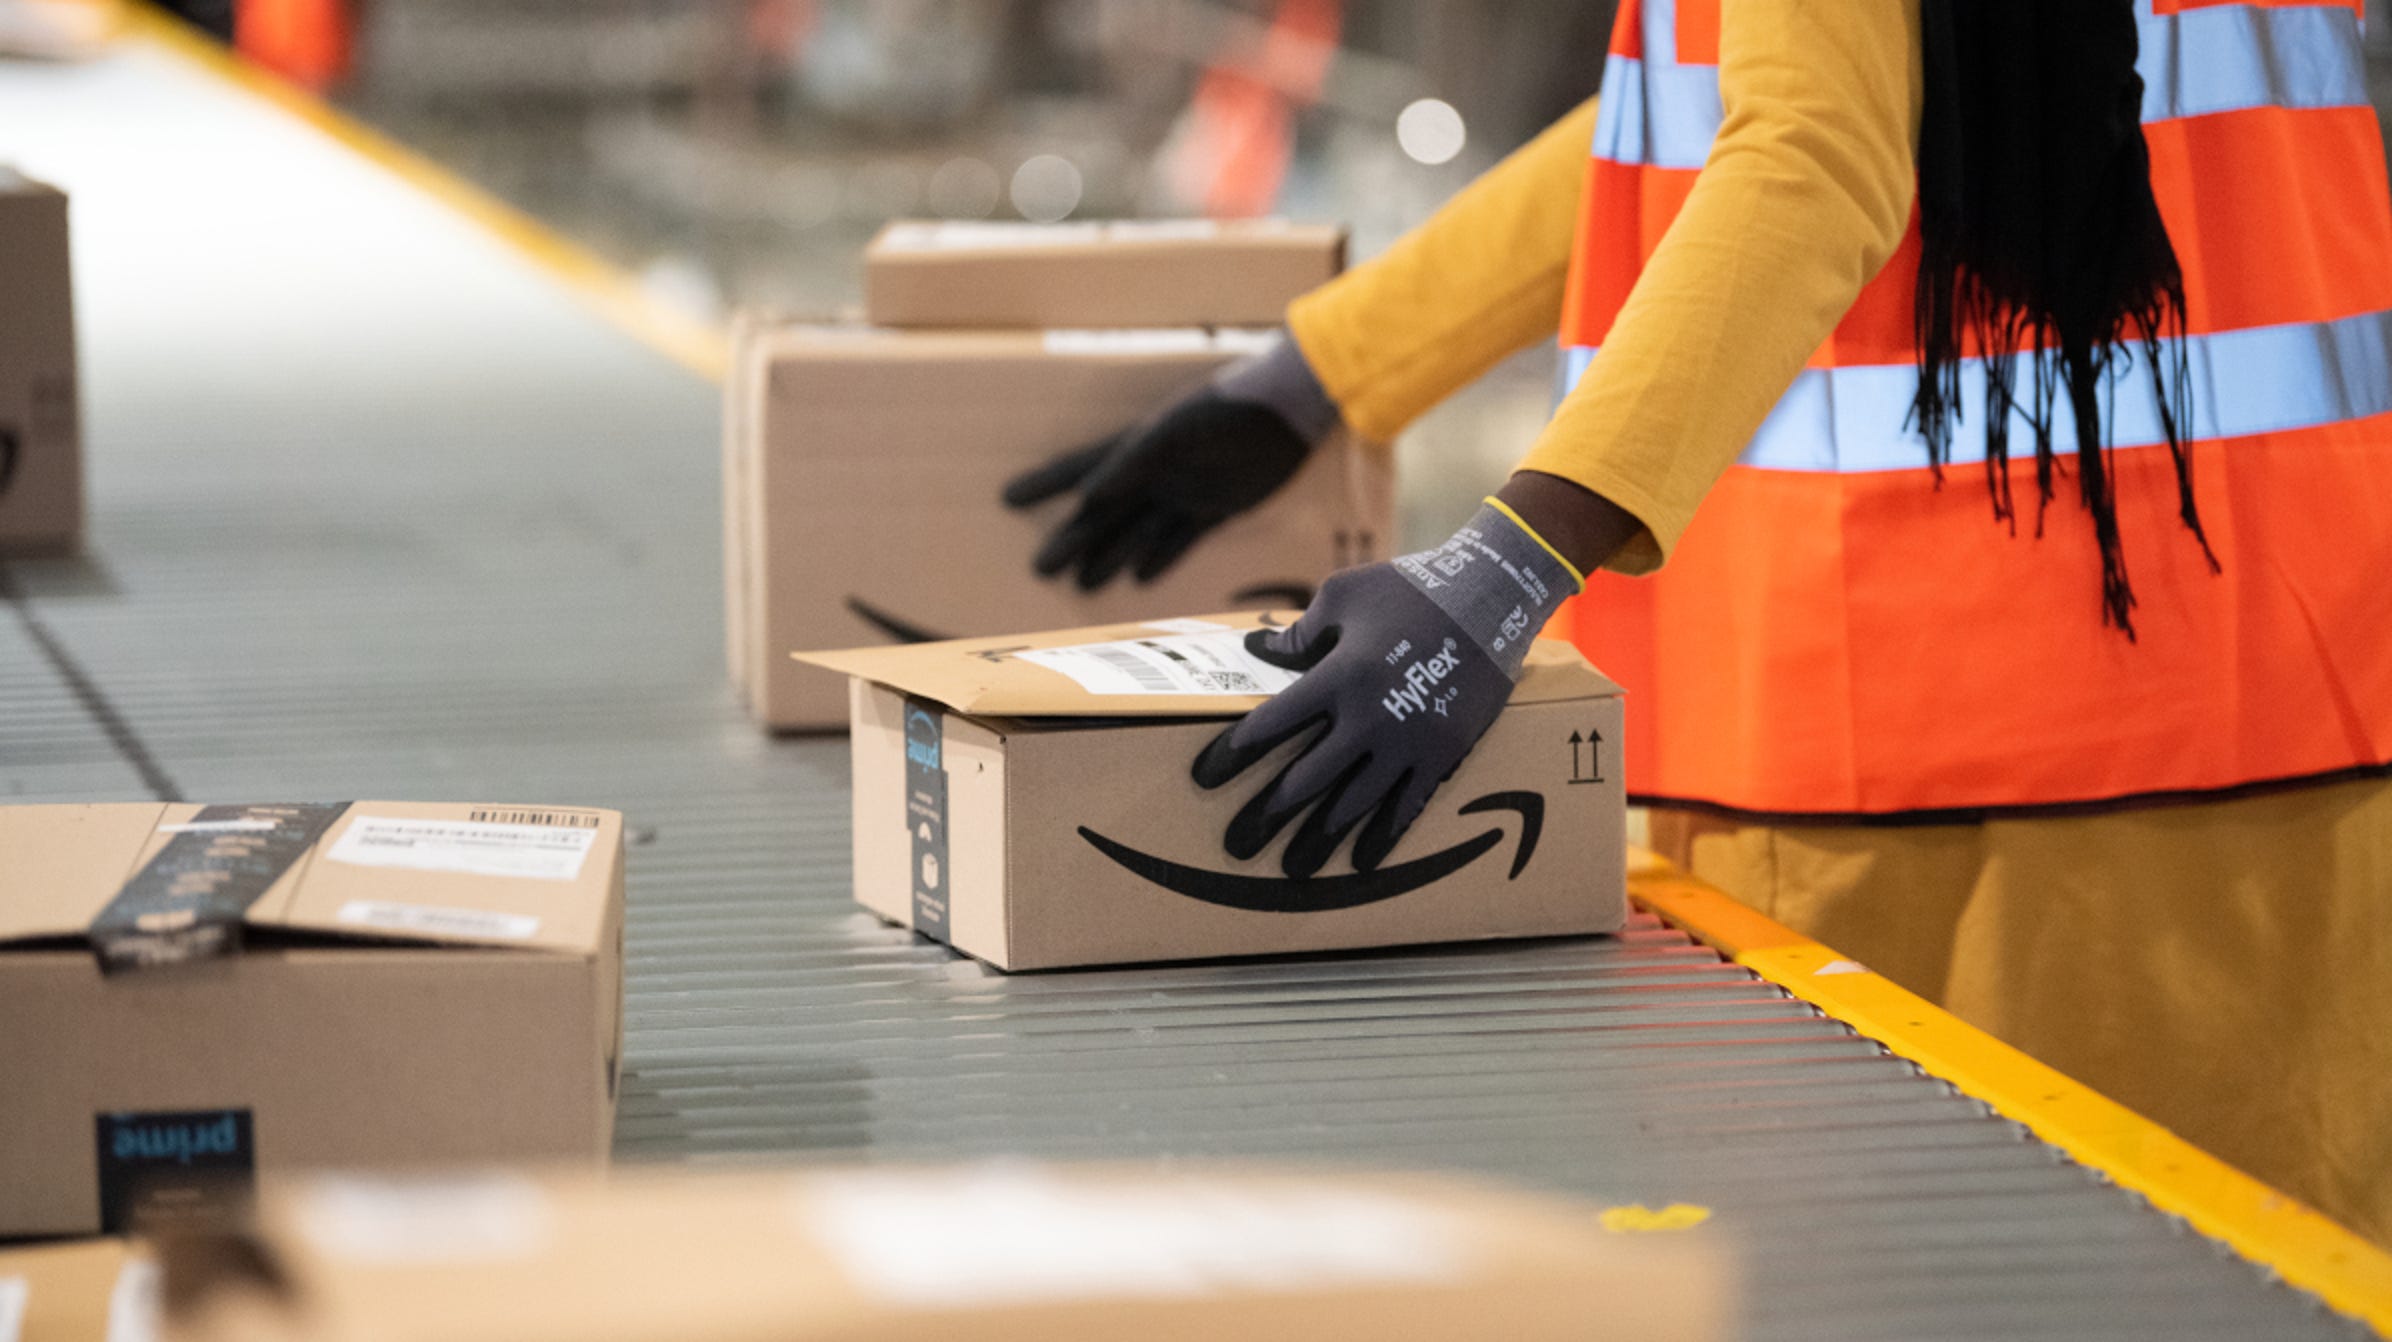 How to Cancel an Amazon Order and Get a Refund